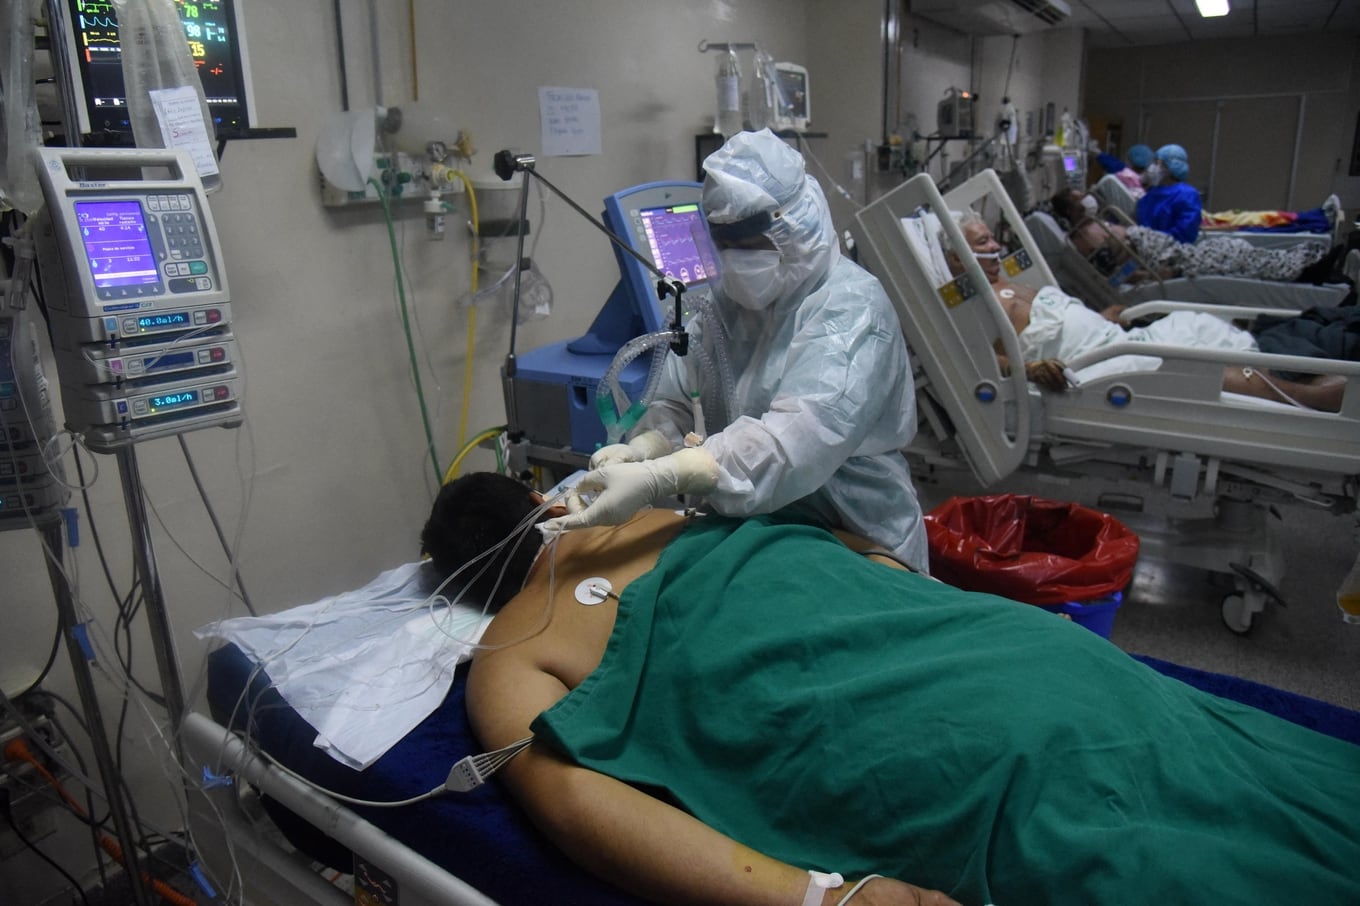 A health worker assists a COVID-19 patient at the intensive care unit of the Clinics Hospital in San Lorenzo, Paraguay, on March 16, 2021. - Paraguay's government reinforced restrictions due to an increase in the number of cases of COVID-19, which has collapsed the healthcare system. (Photo by DANIEL DUARTE / AFP)